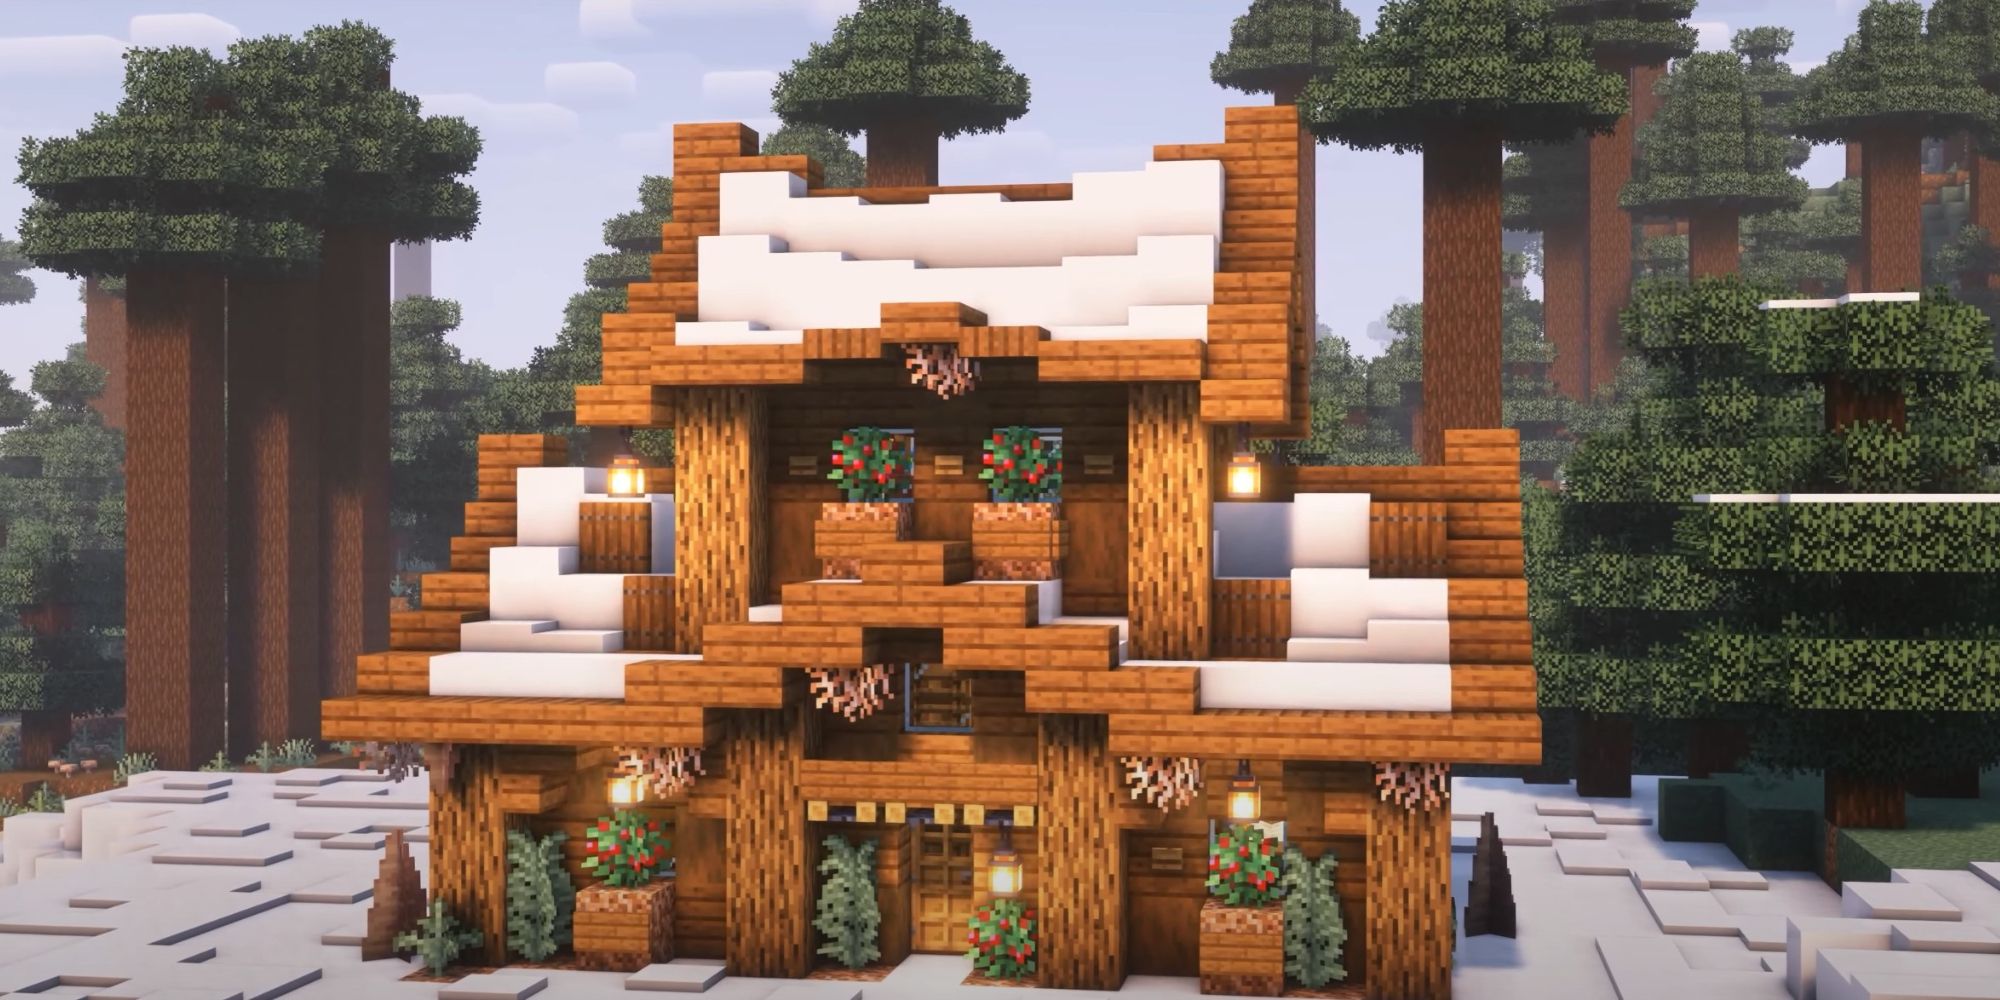 An image from Minecraft of a spuce survival house built within a snowy forest. This house uses dead plants and berries alongside the snow covered wood. 